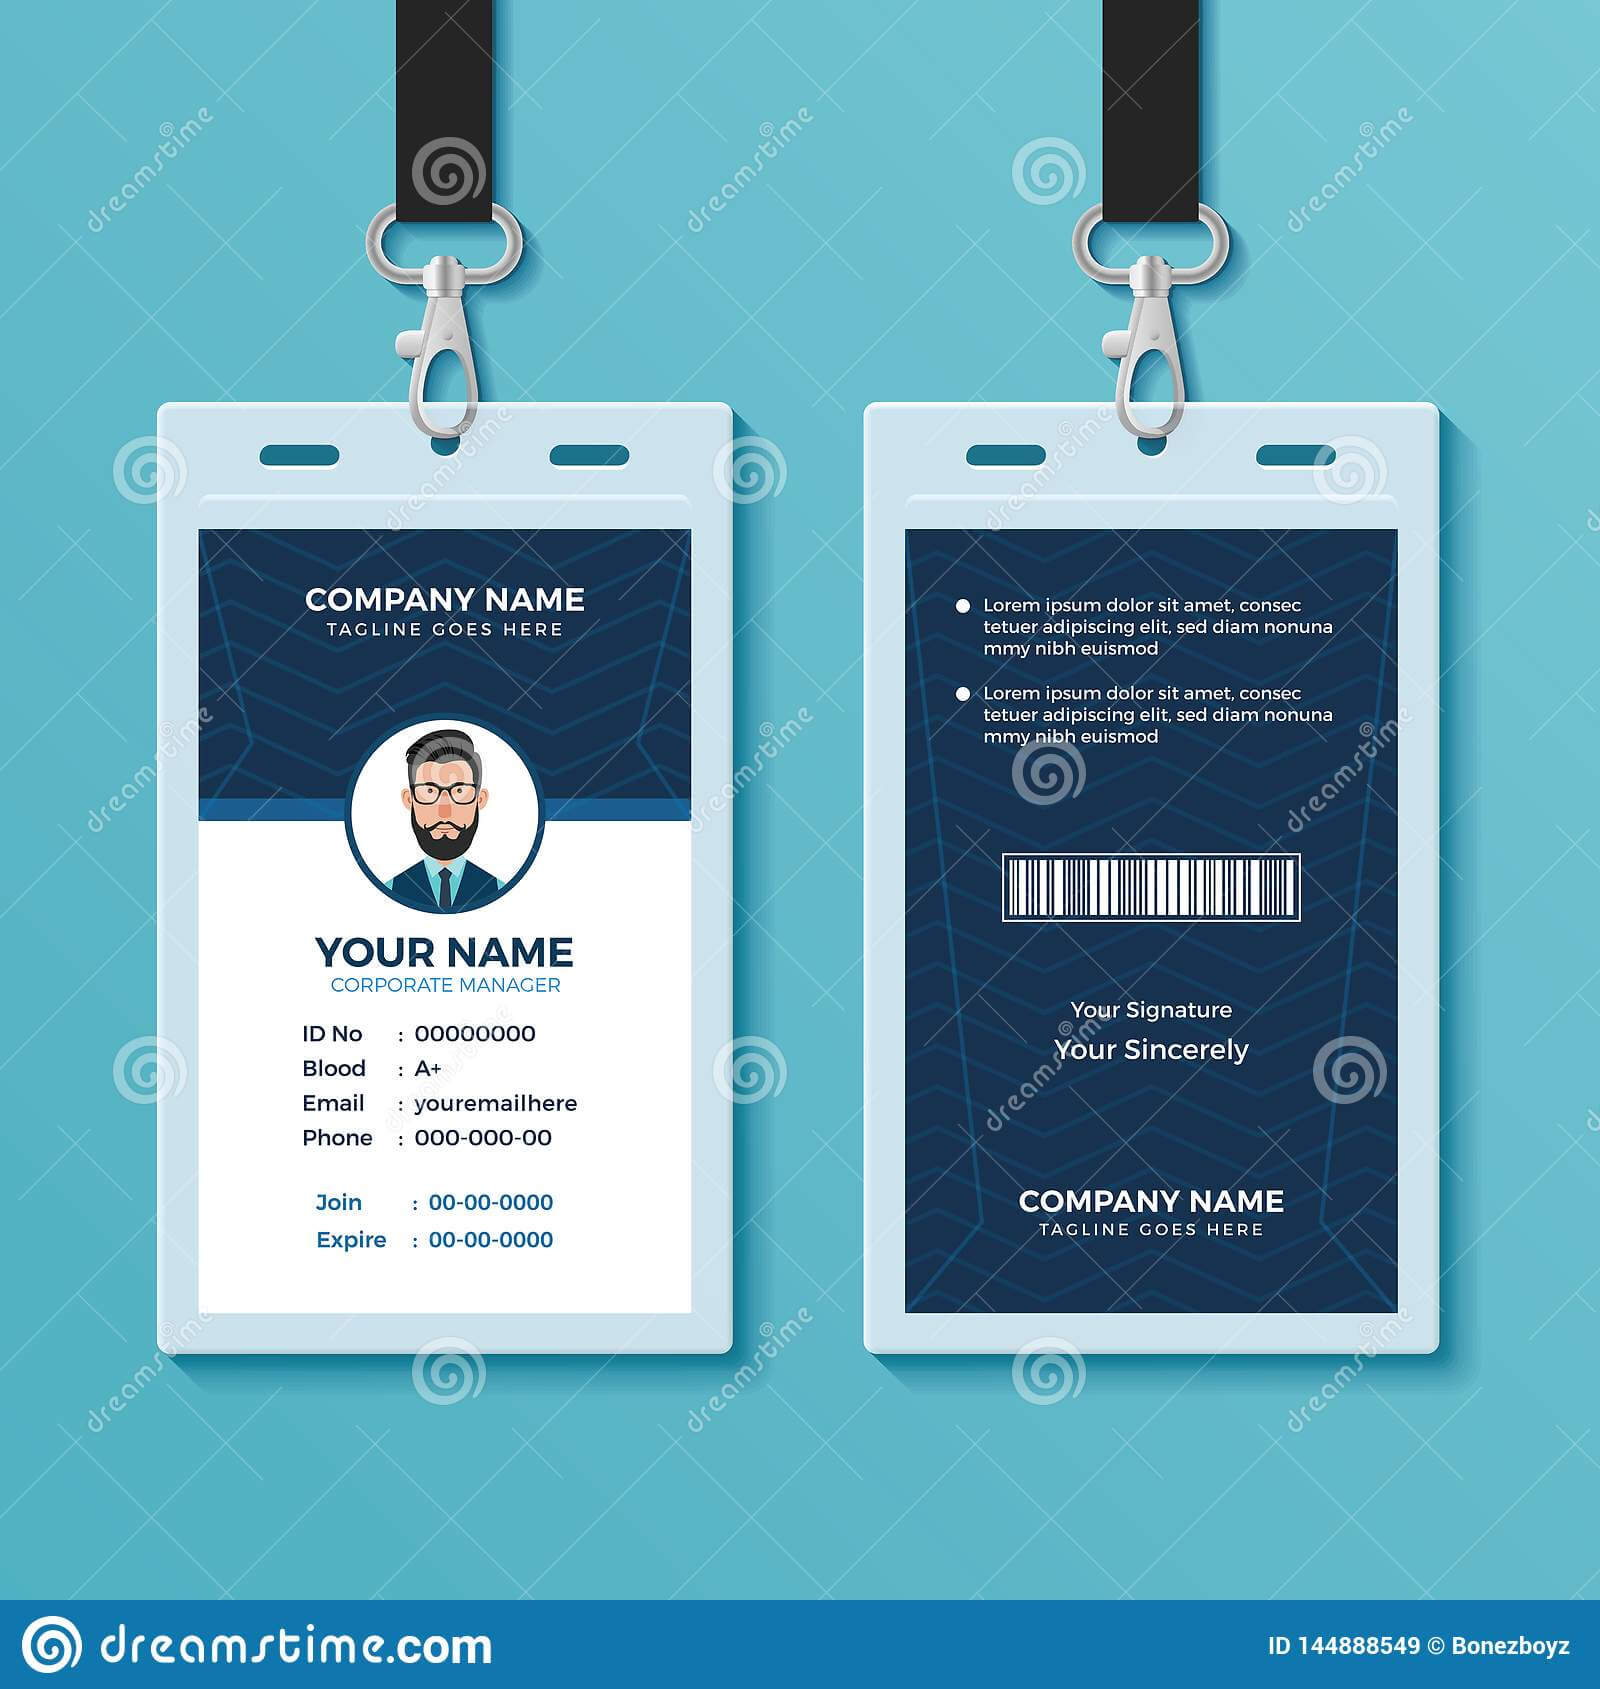 Modern And Clean Id Card Design Template Stock Vector Inside Conference Id Card Template